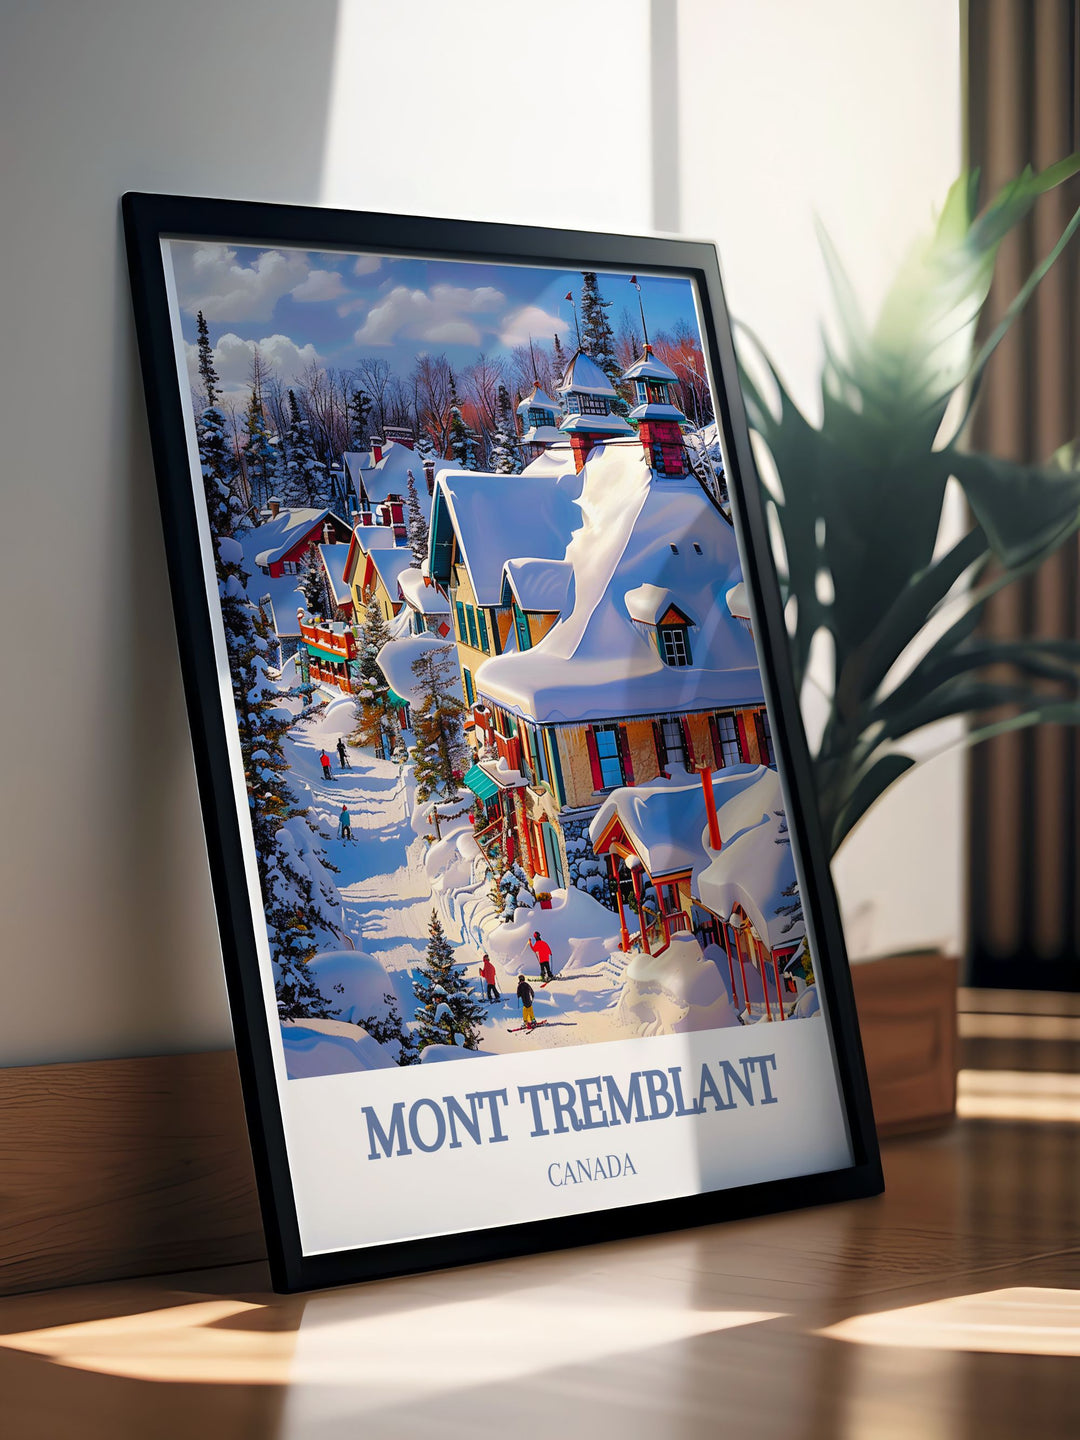 National Park Poster featuring Mont Tremblant and Tremblant Ski Resort illustrating the picturesque beauty of the Laurentian Mountains perfect for enhancing your living room bedroom or office with a touch of Canadian wilderness and vibrant colors.